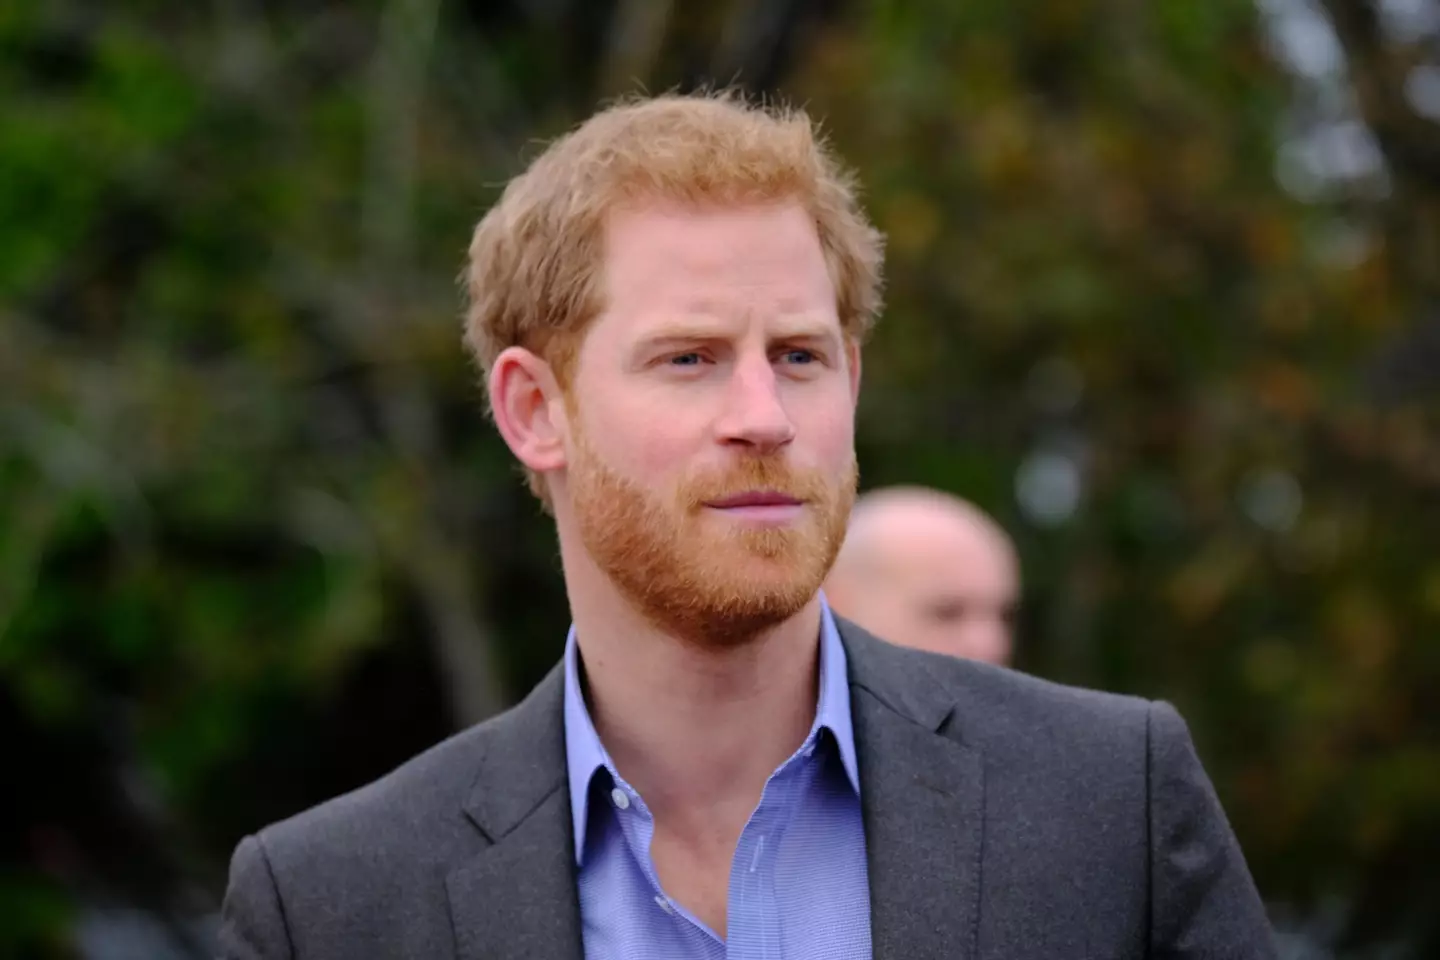 Prince Harry is said to have ended up at Courteney Cox's home after a party.